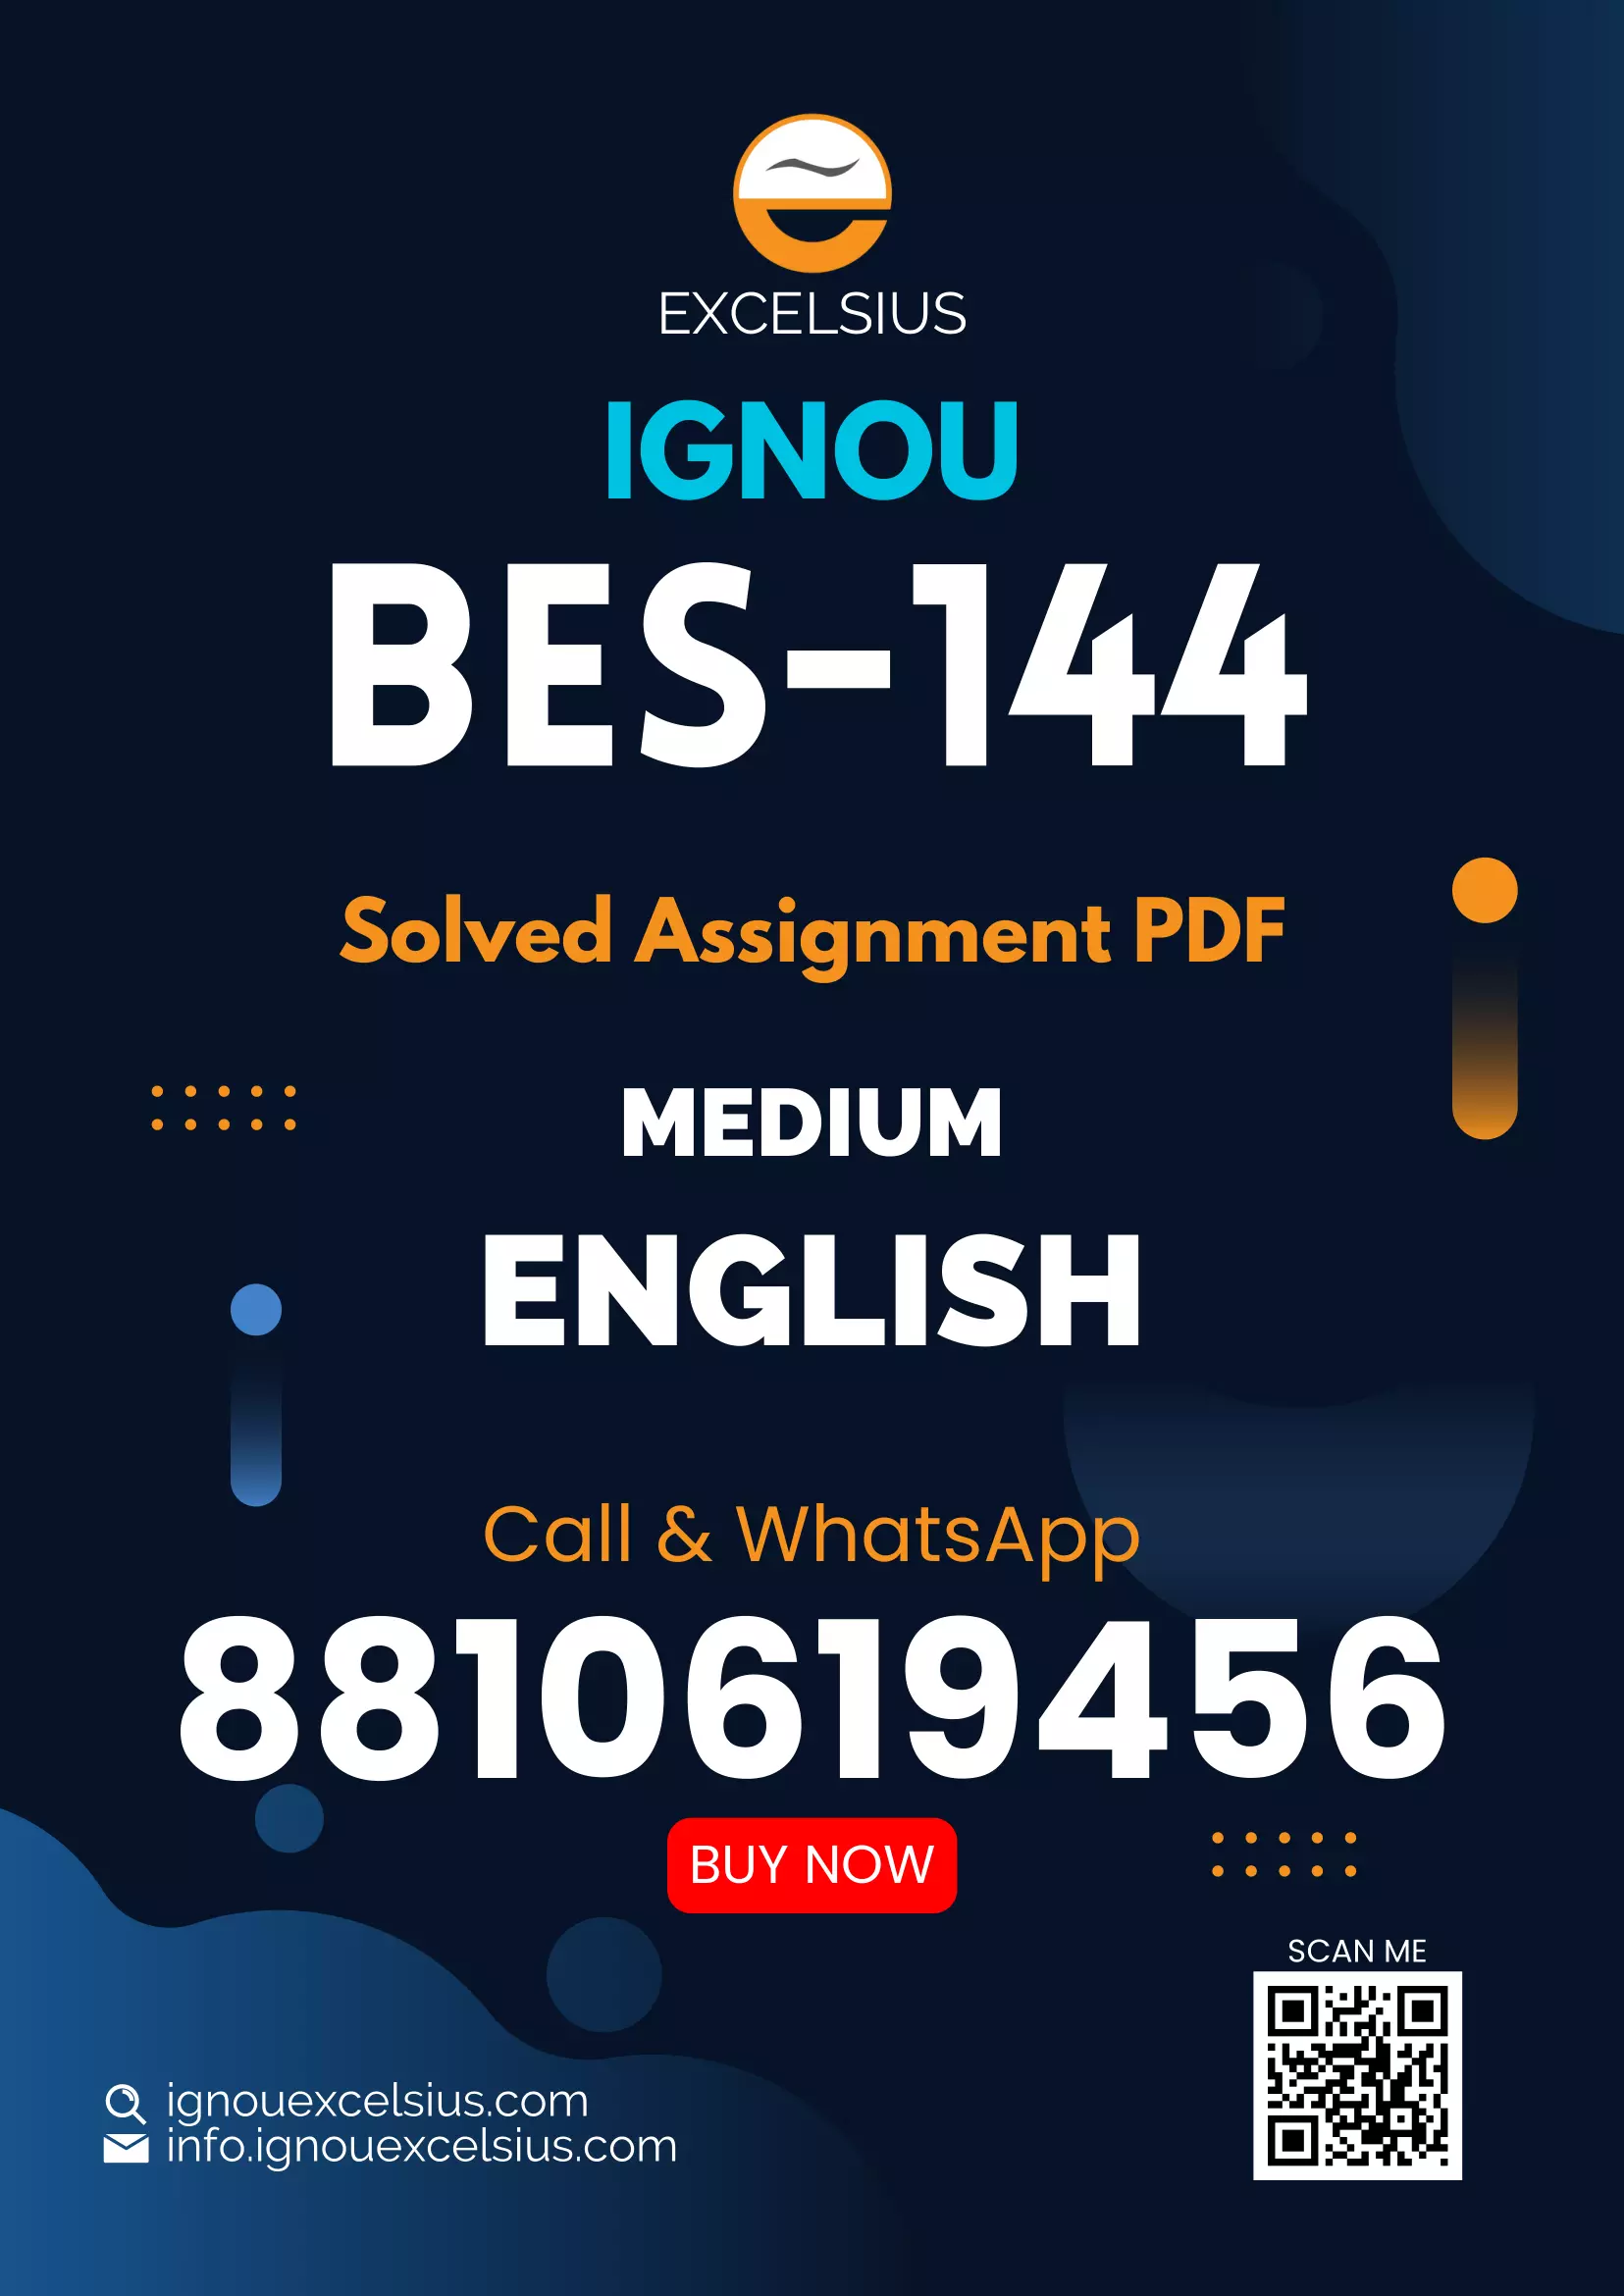 IGNOU BES-144 - Pedagogy of English, Latest Solved Assignment-January 2022